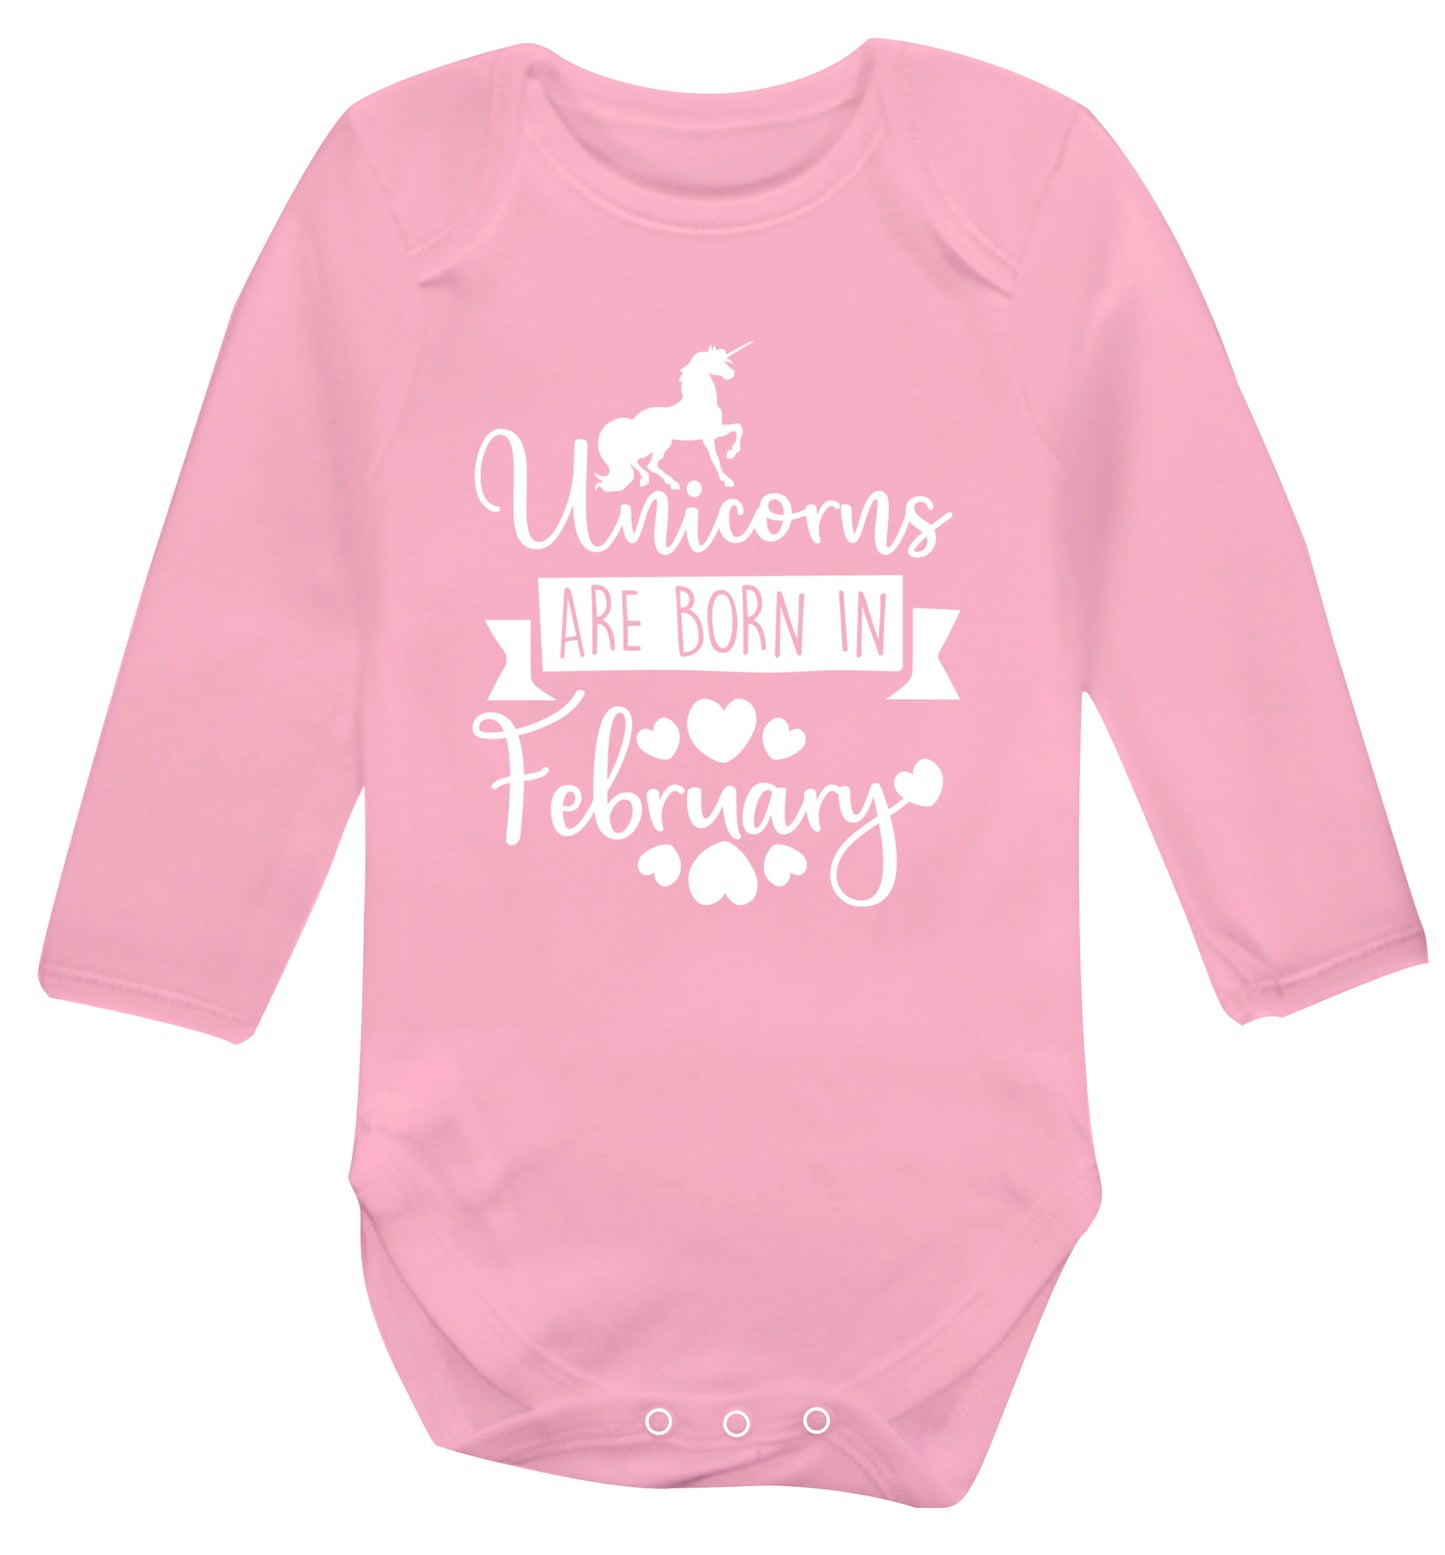 Unicorns are born in February Baby Vest long sleeved pale pink 6-12 months